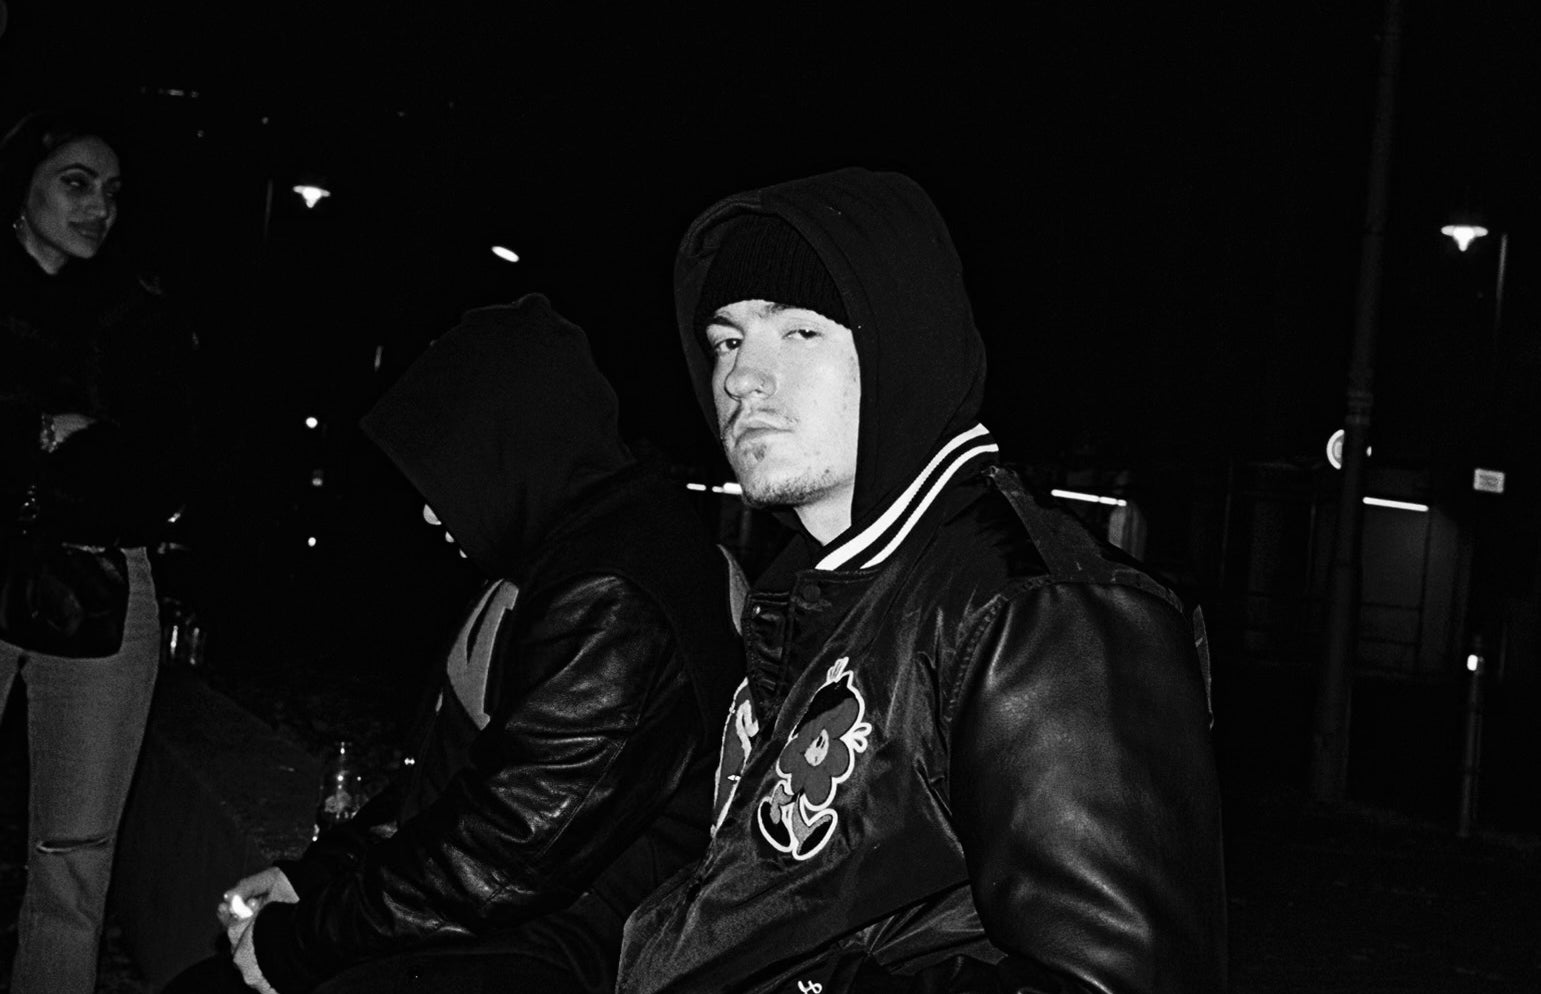 Individual in hood and jacket with embroidered details, leaning forward with a focused expression